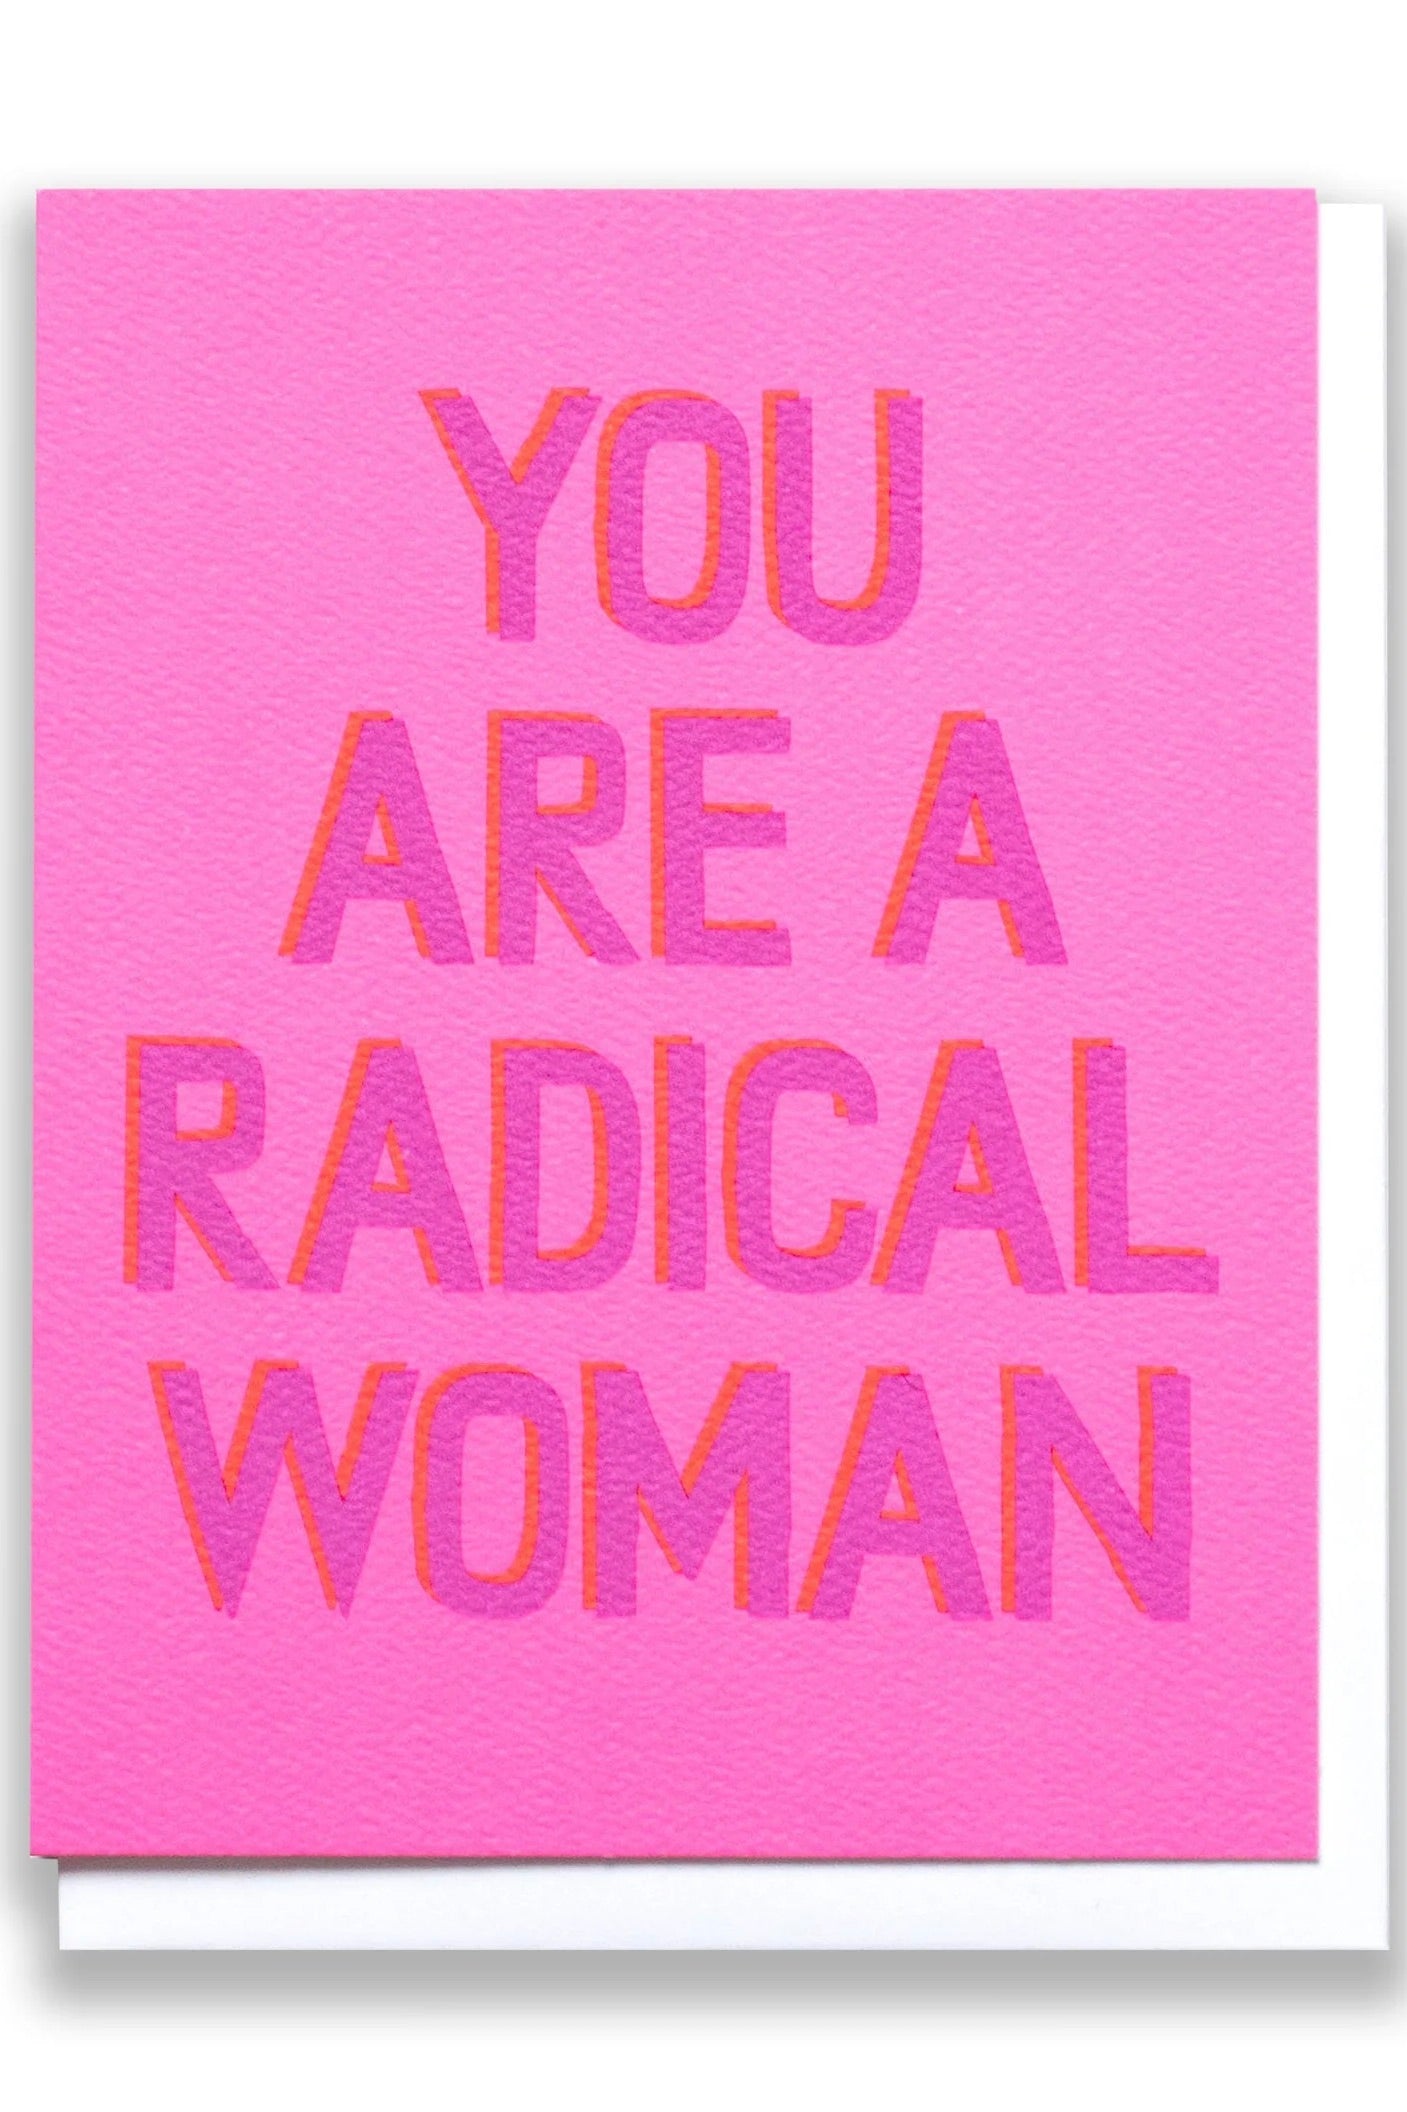 Banquet Note Card / You Are A Radical Woman